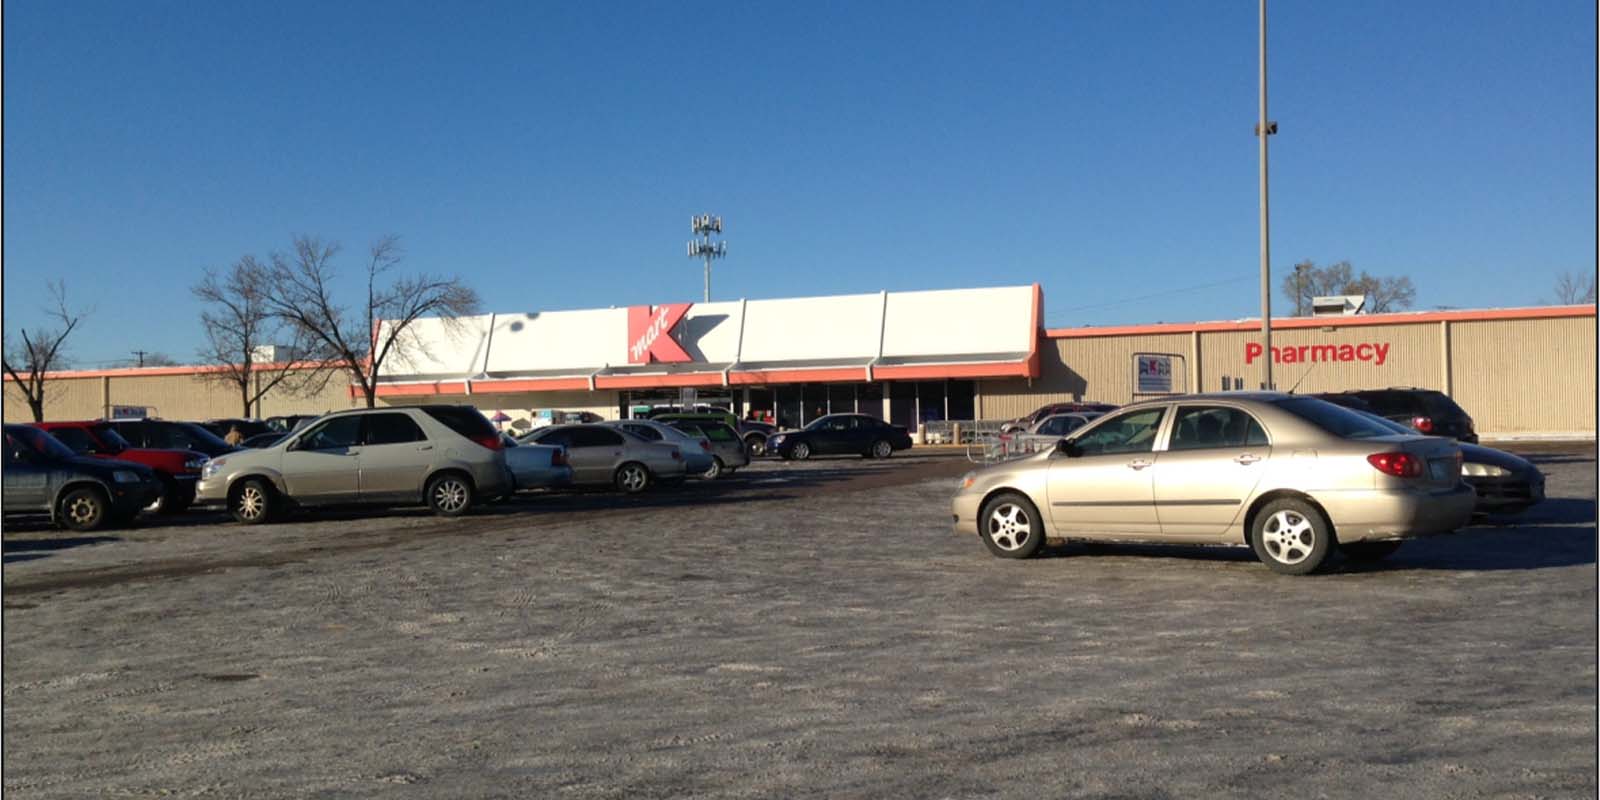 Looking at front exterior of former Kmart on Nicollet; parking lot and cars in foreground.